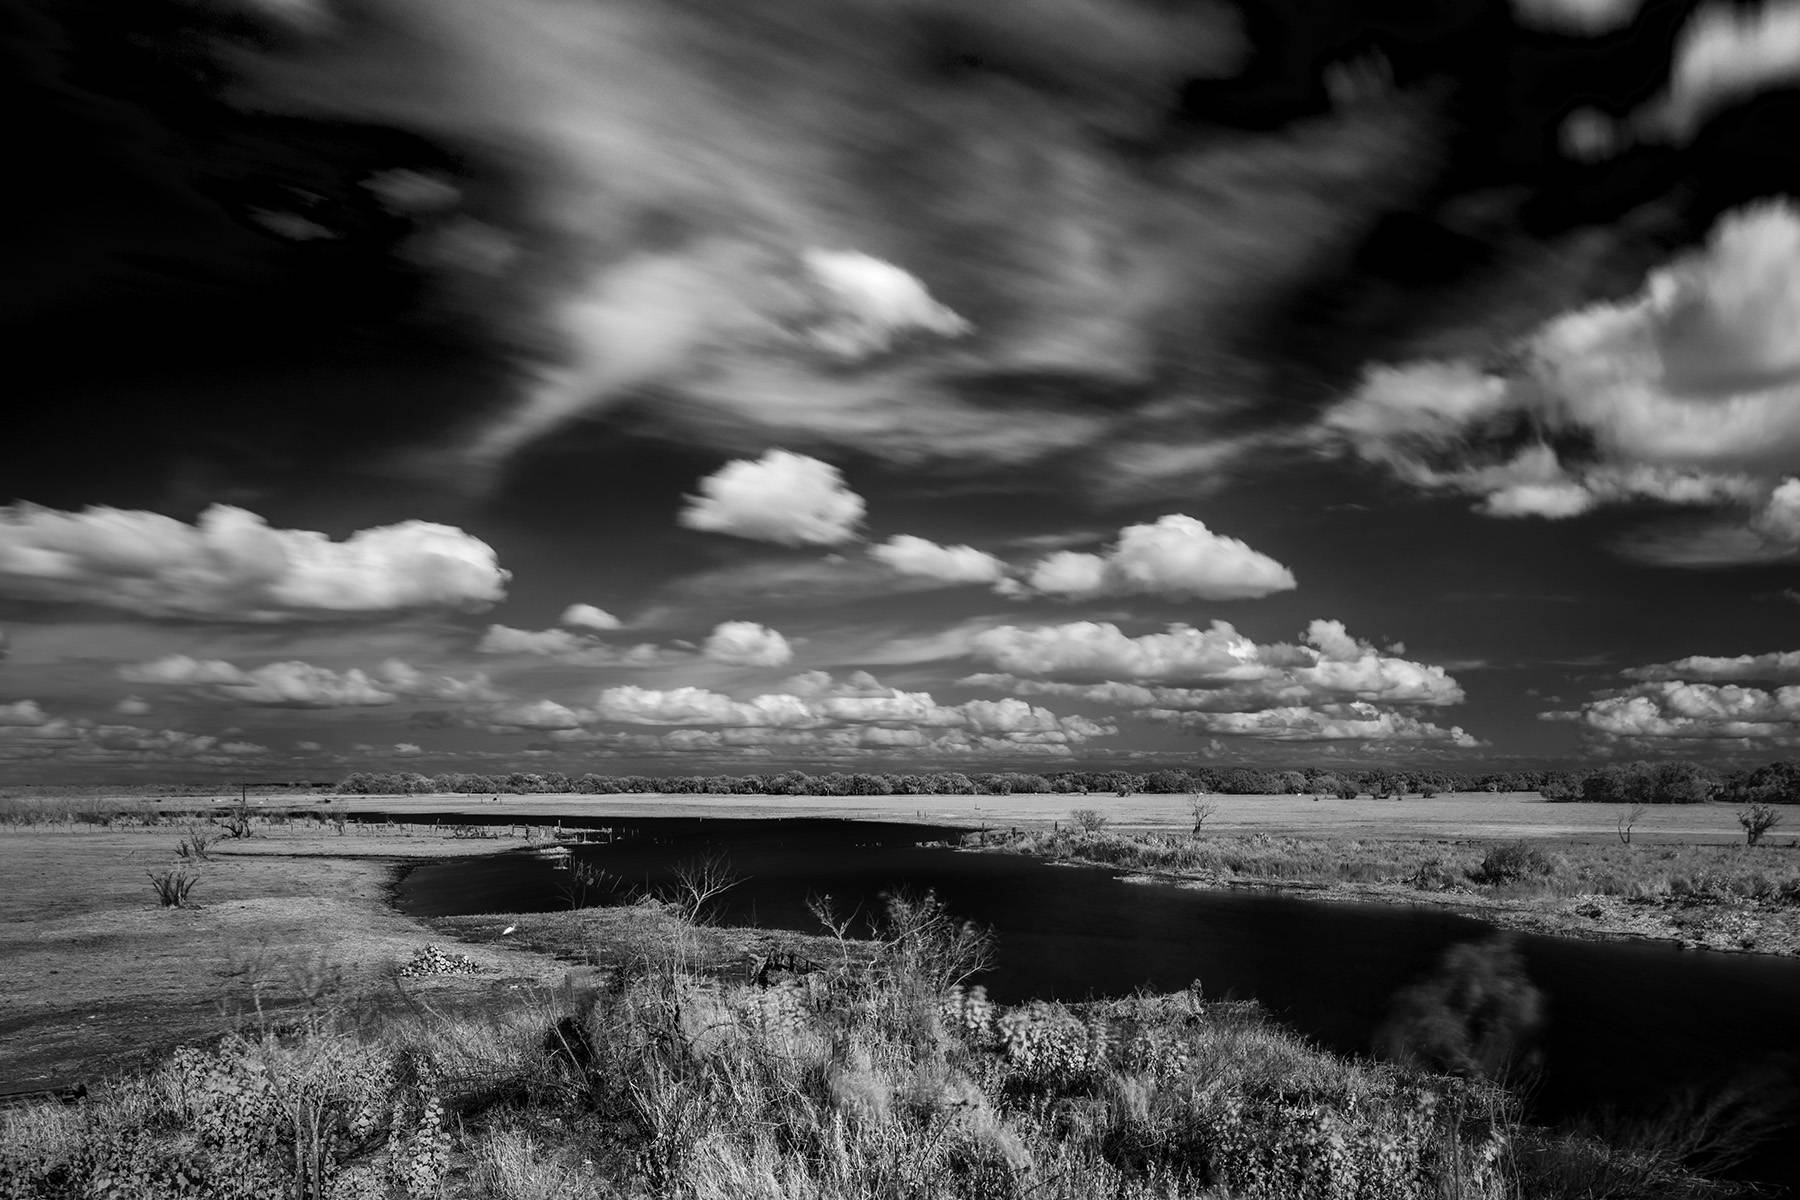 myakka_river_at_old_ranch_road_infra_red_black_and_white